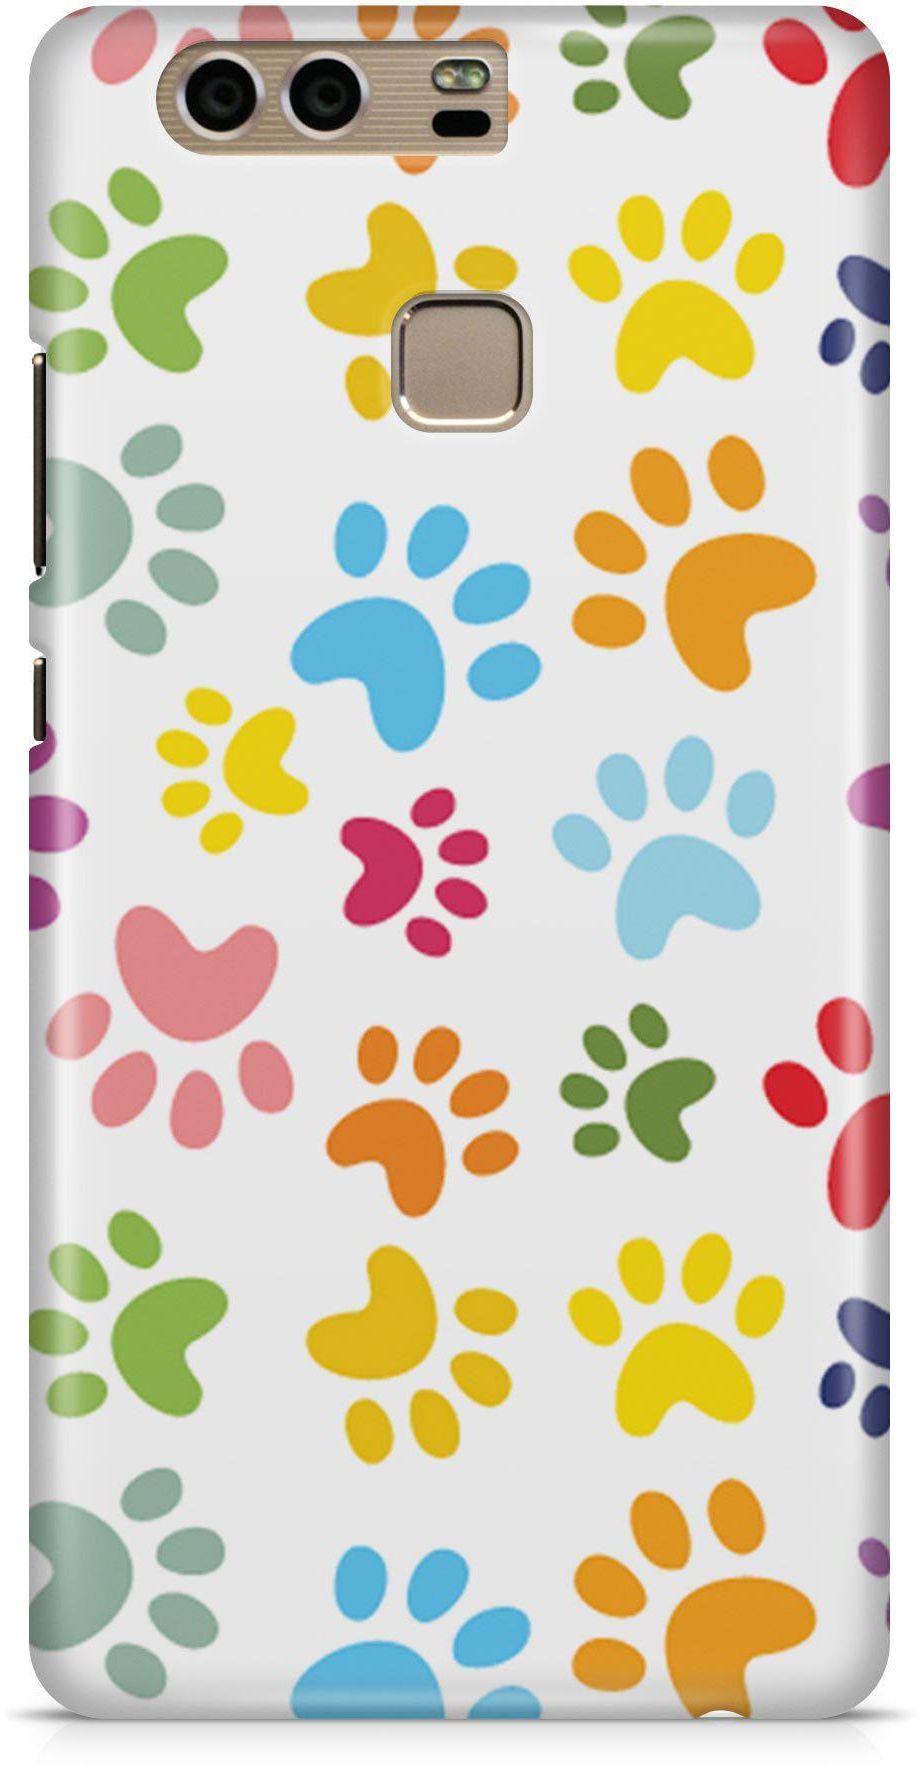 Coloured Footprint Paws Animal Cat Dog Rabbit Phone Case Cover for Huawei P9